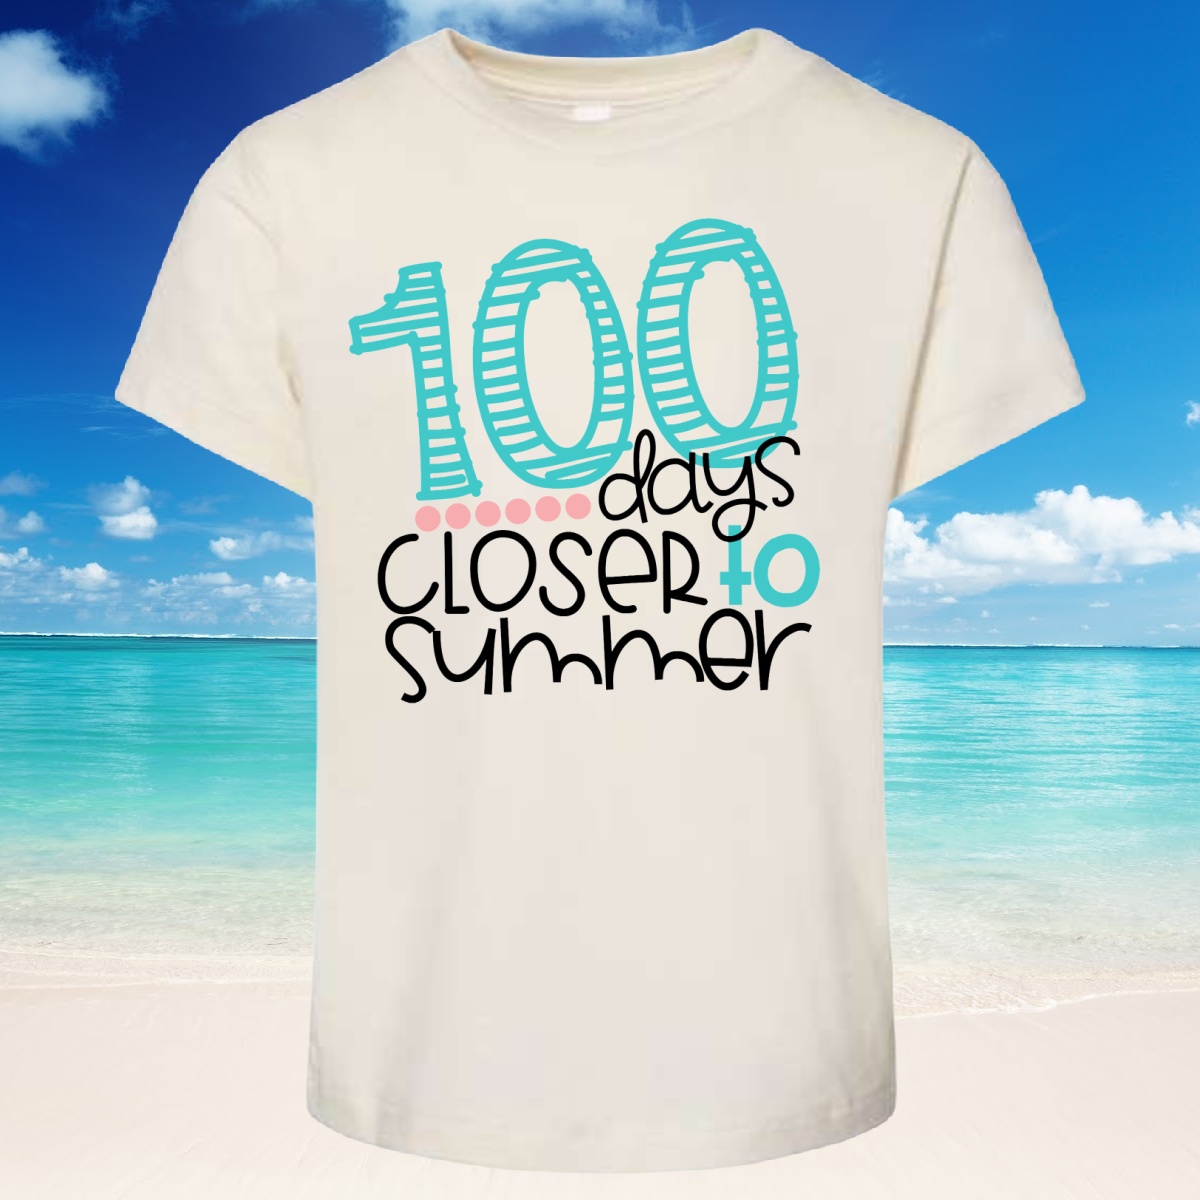 100 Days Closer To Summer - Youth